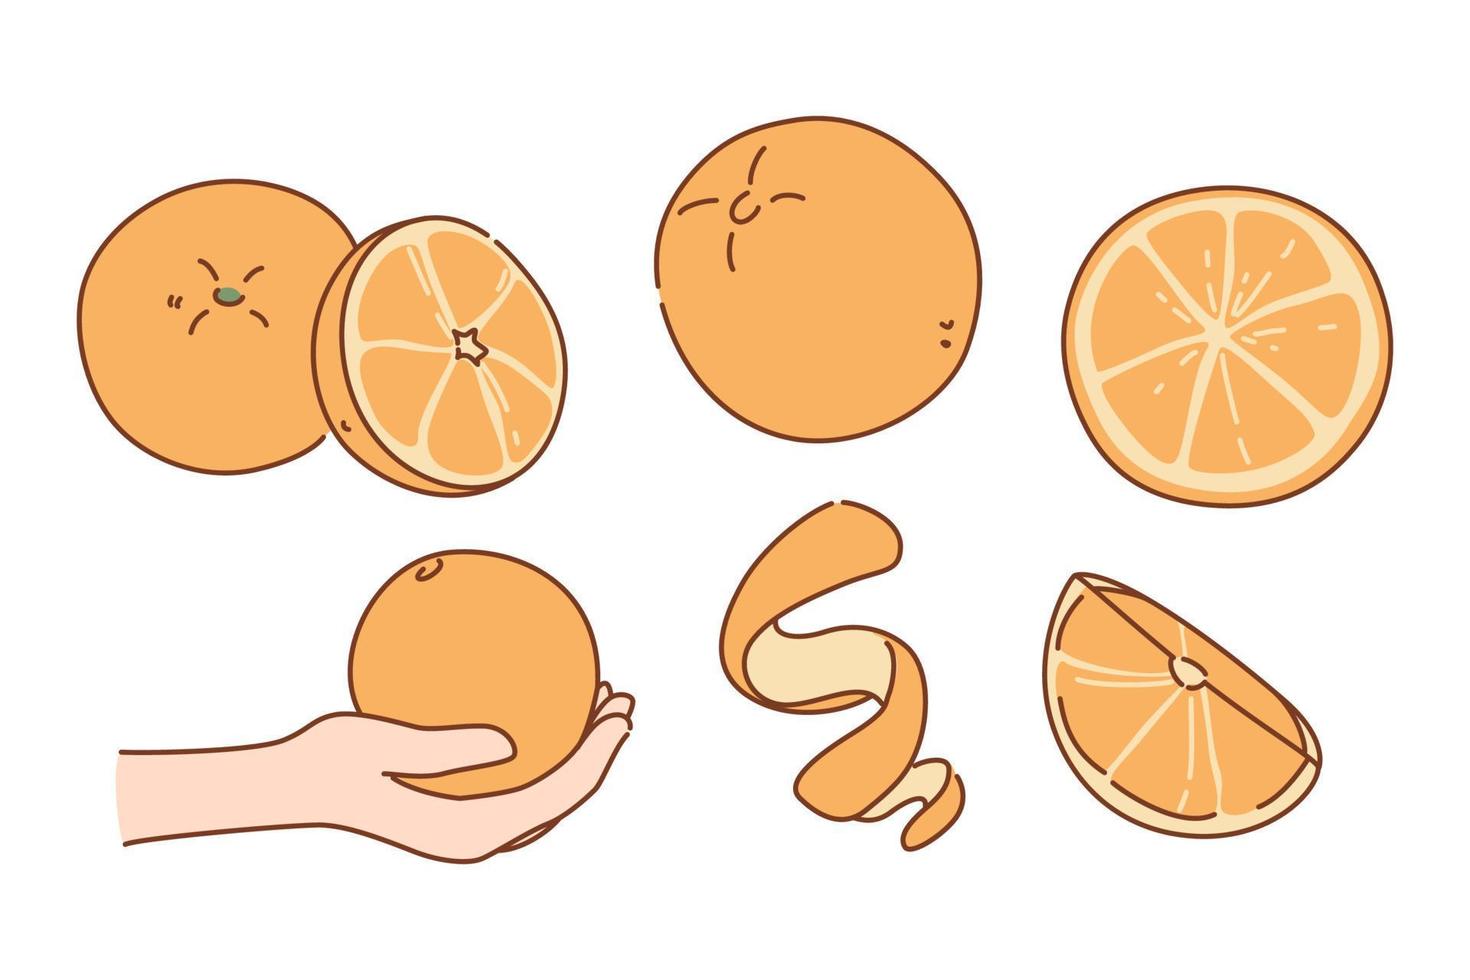 Set of juicy fresh oranges sliced or whole. Collection of organic bio tasty mandarin or tangerine. Healthy fruit eating. Good habit concept. Gardening and farming nature product. Vector illustration.